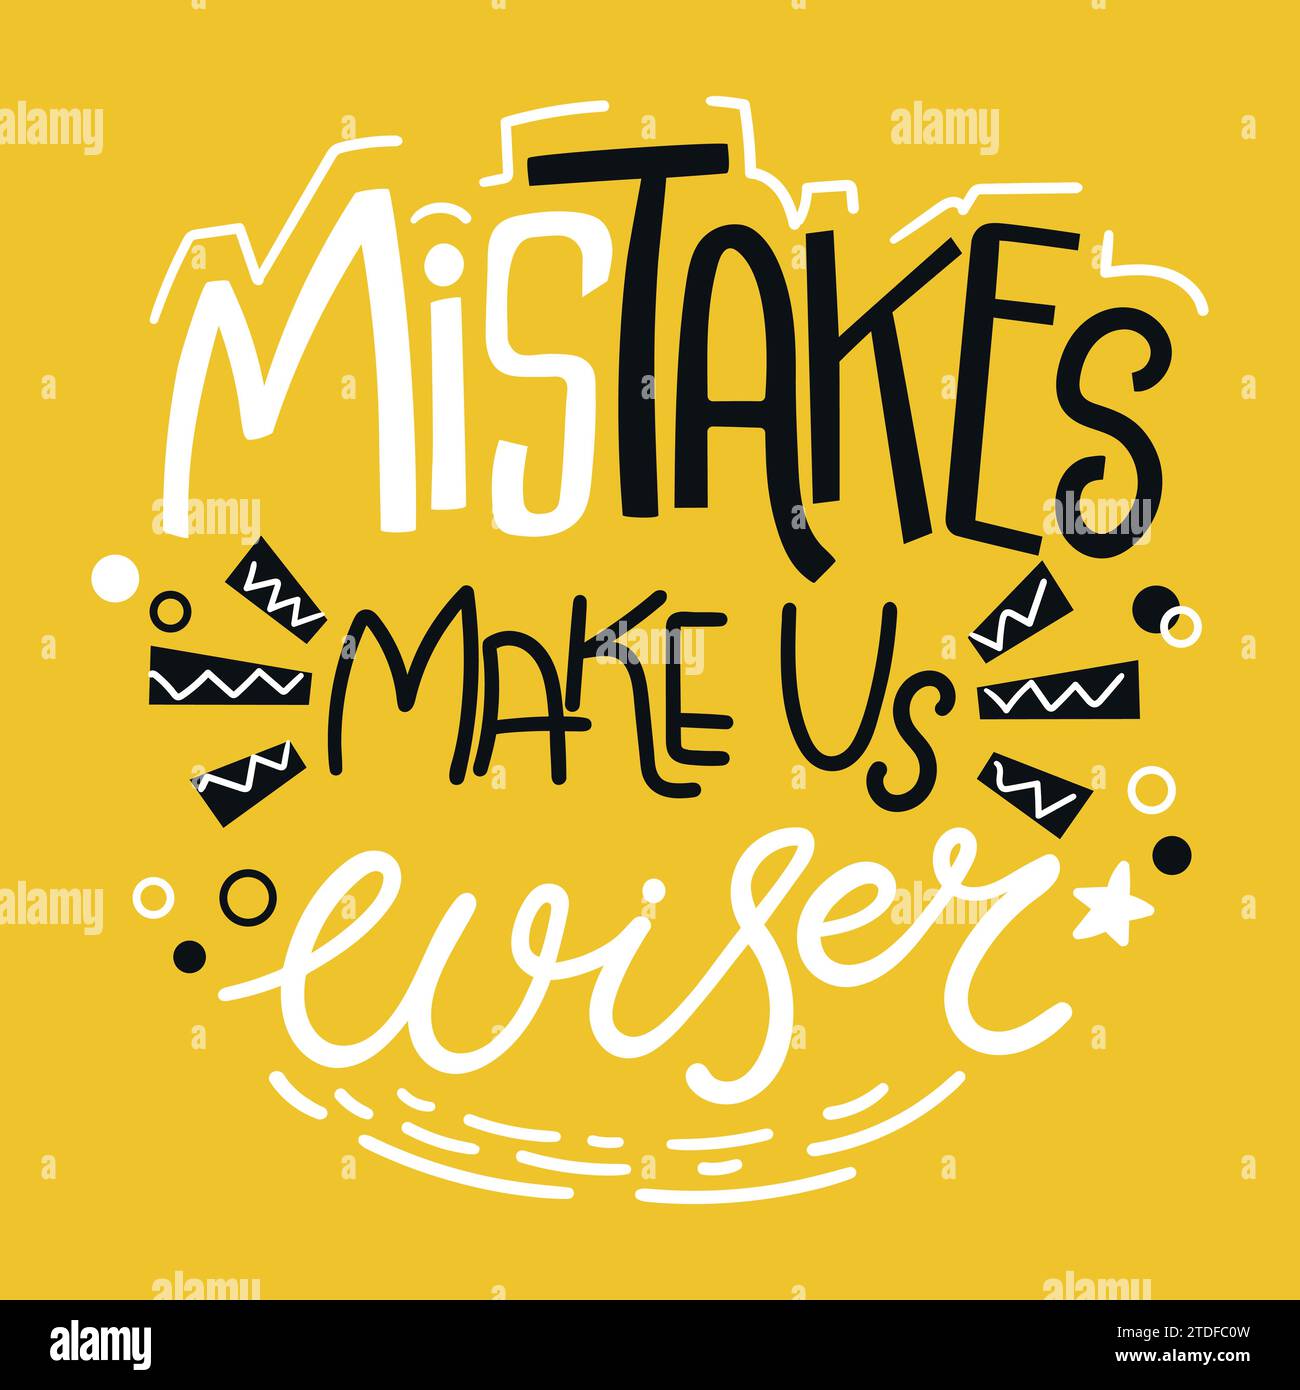 Mistakes make us wiser quote on yellow background. It’s ok to make mistakes concept. Hand drawn motivational phrase. Vector illustration Stock Vector